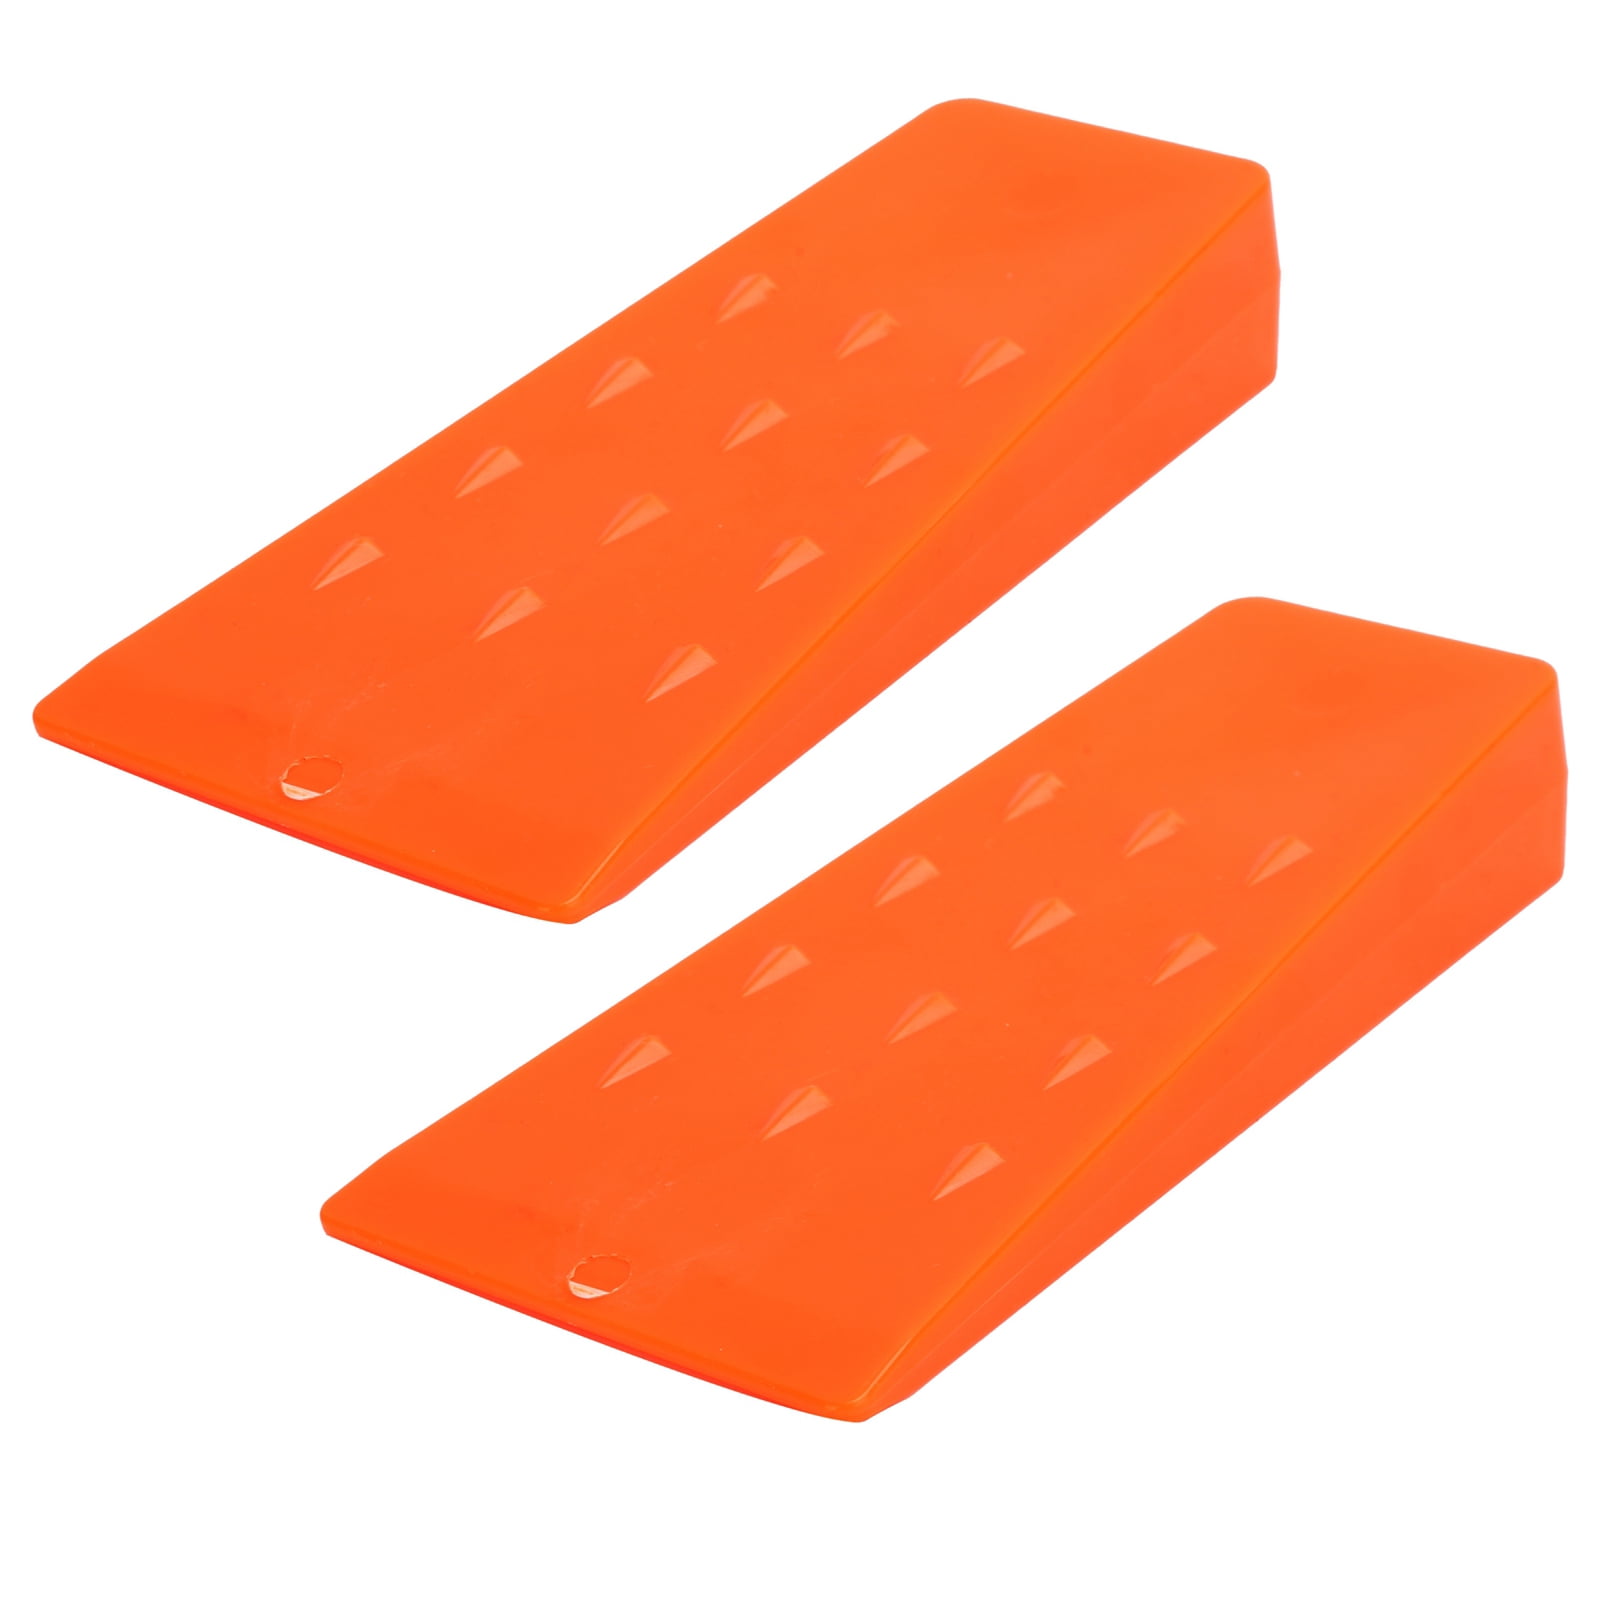 Orange 2PCS Plastic Felling Wedges Portable Tree Cutting Wedges Logging Supplies ChainSaw Accessories